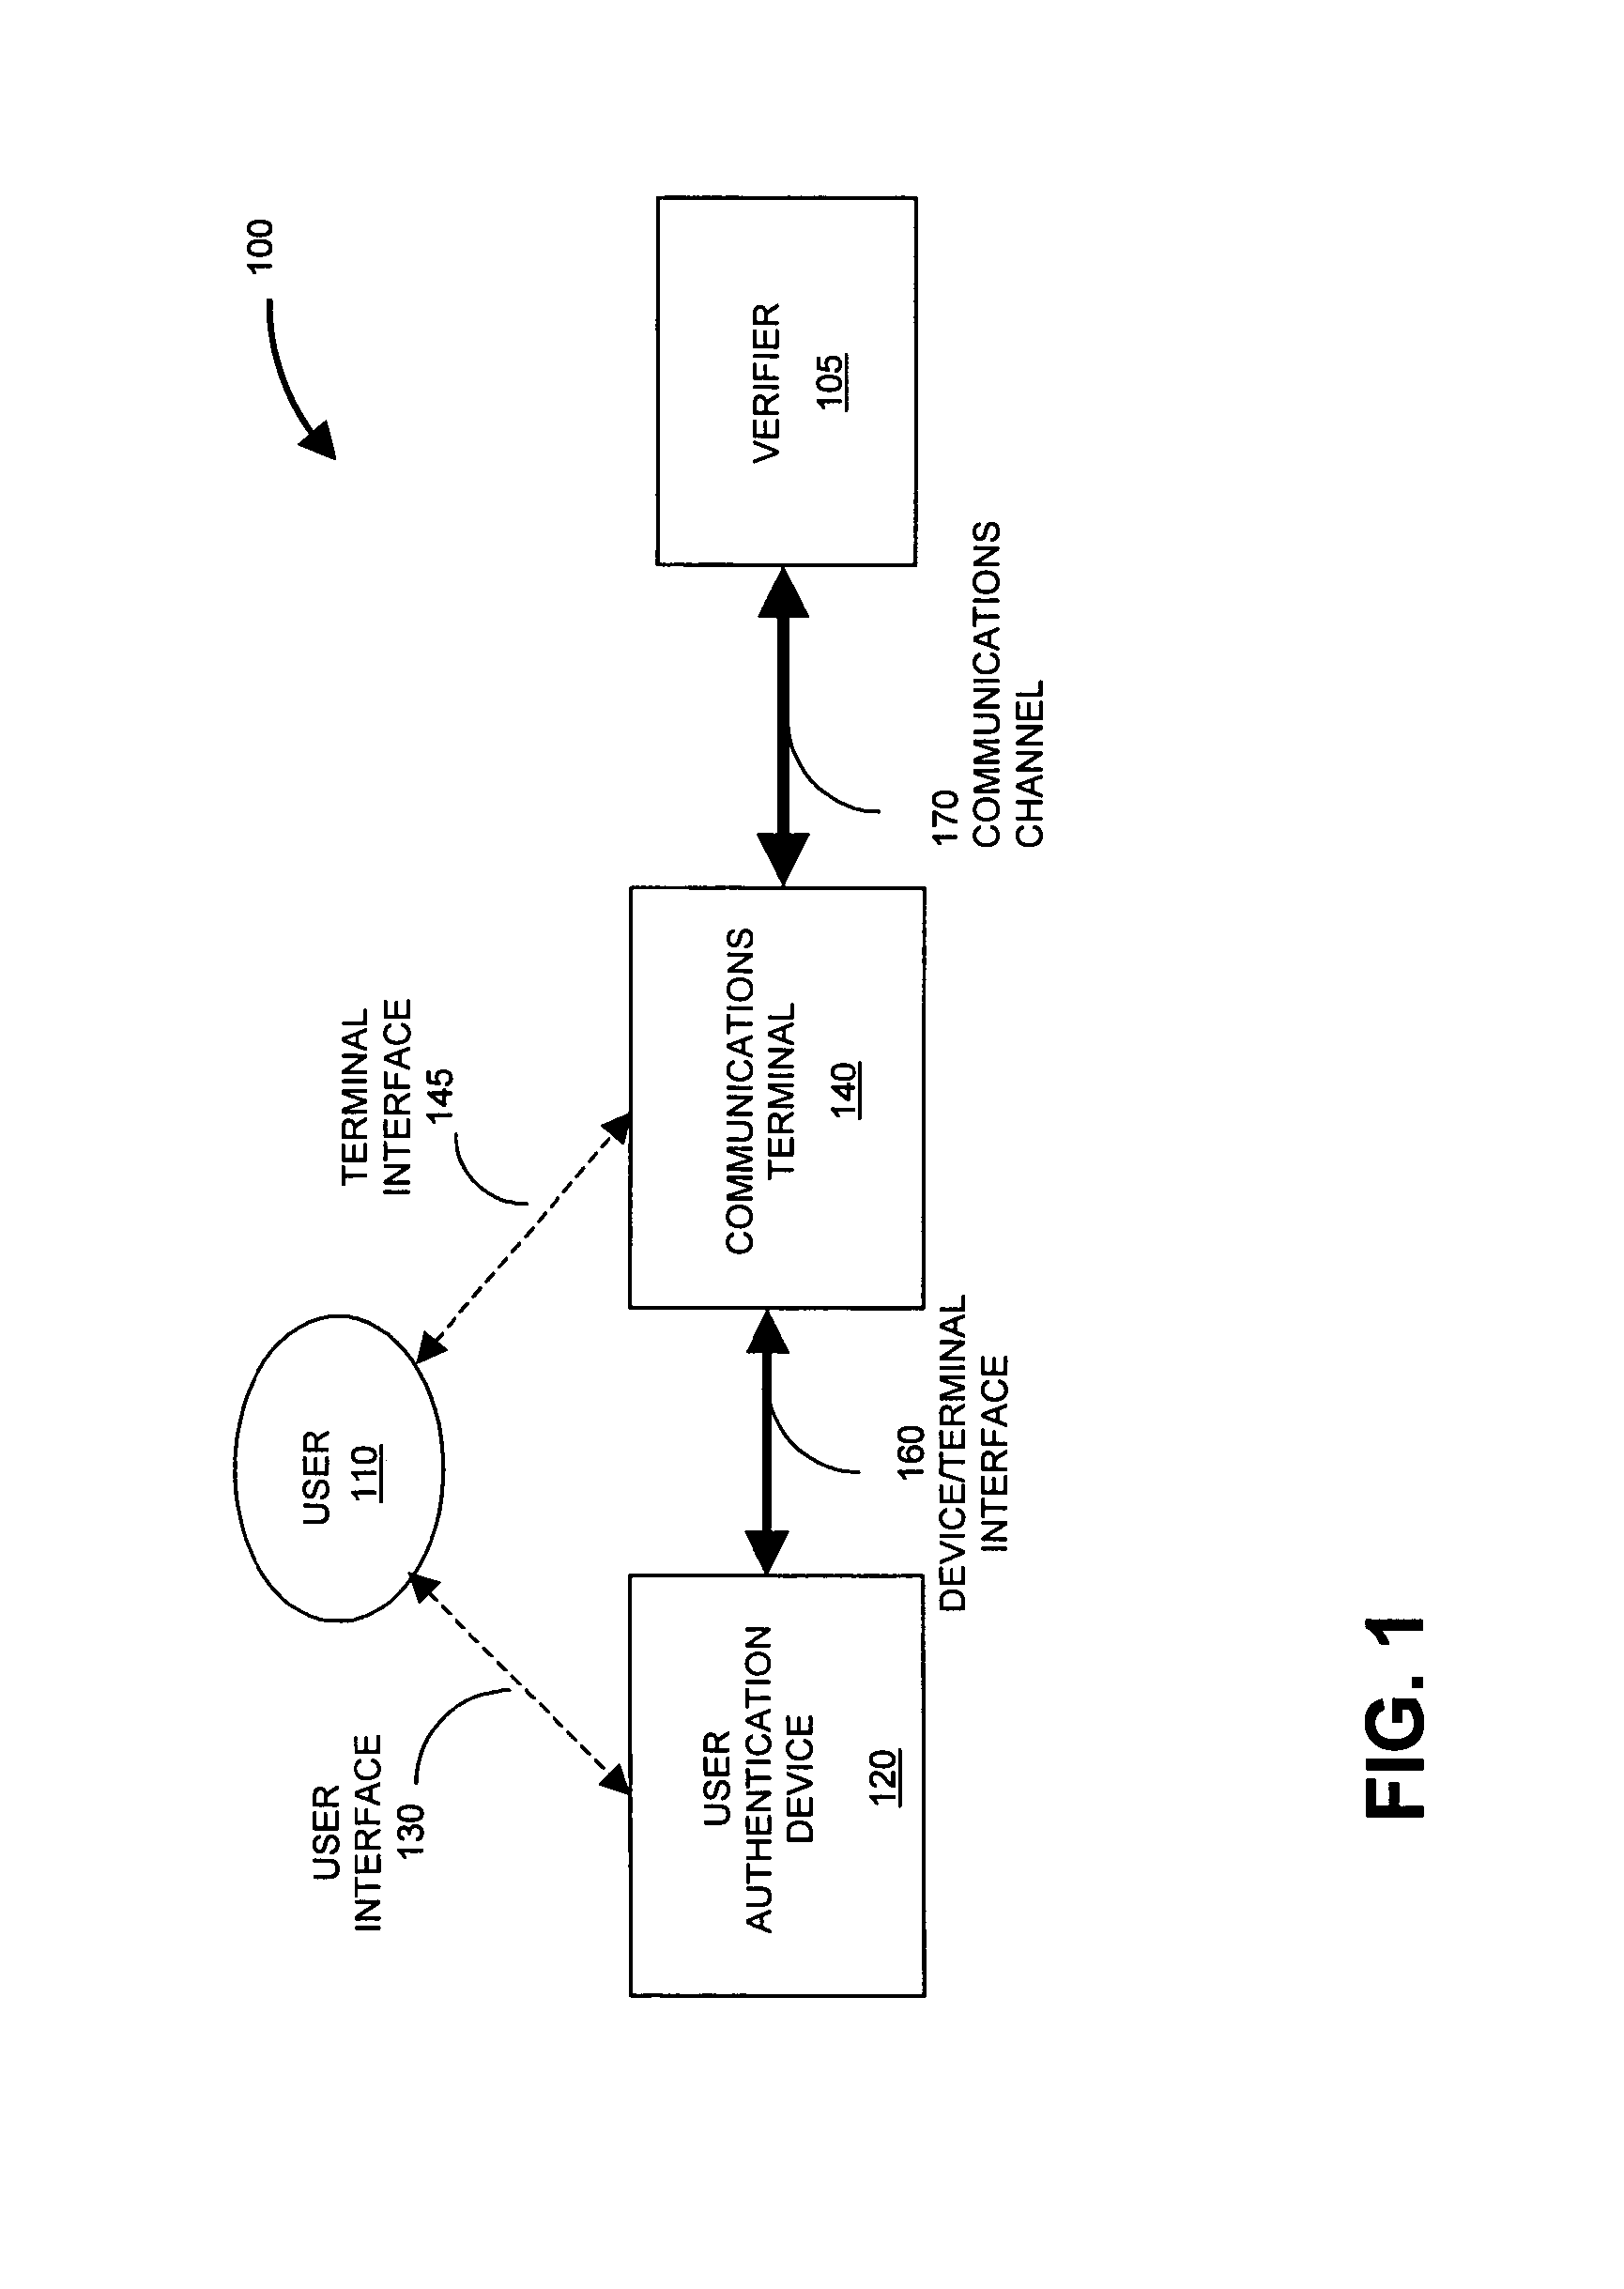 Identity authentication system and method